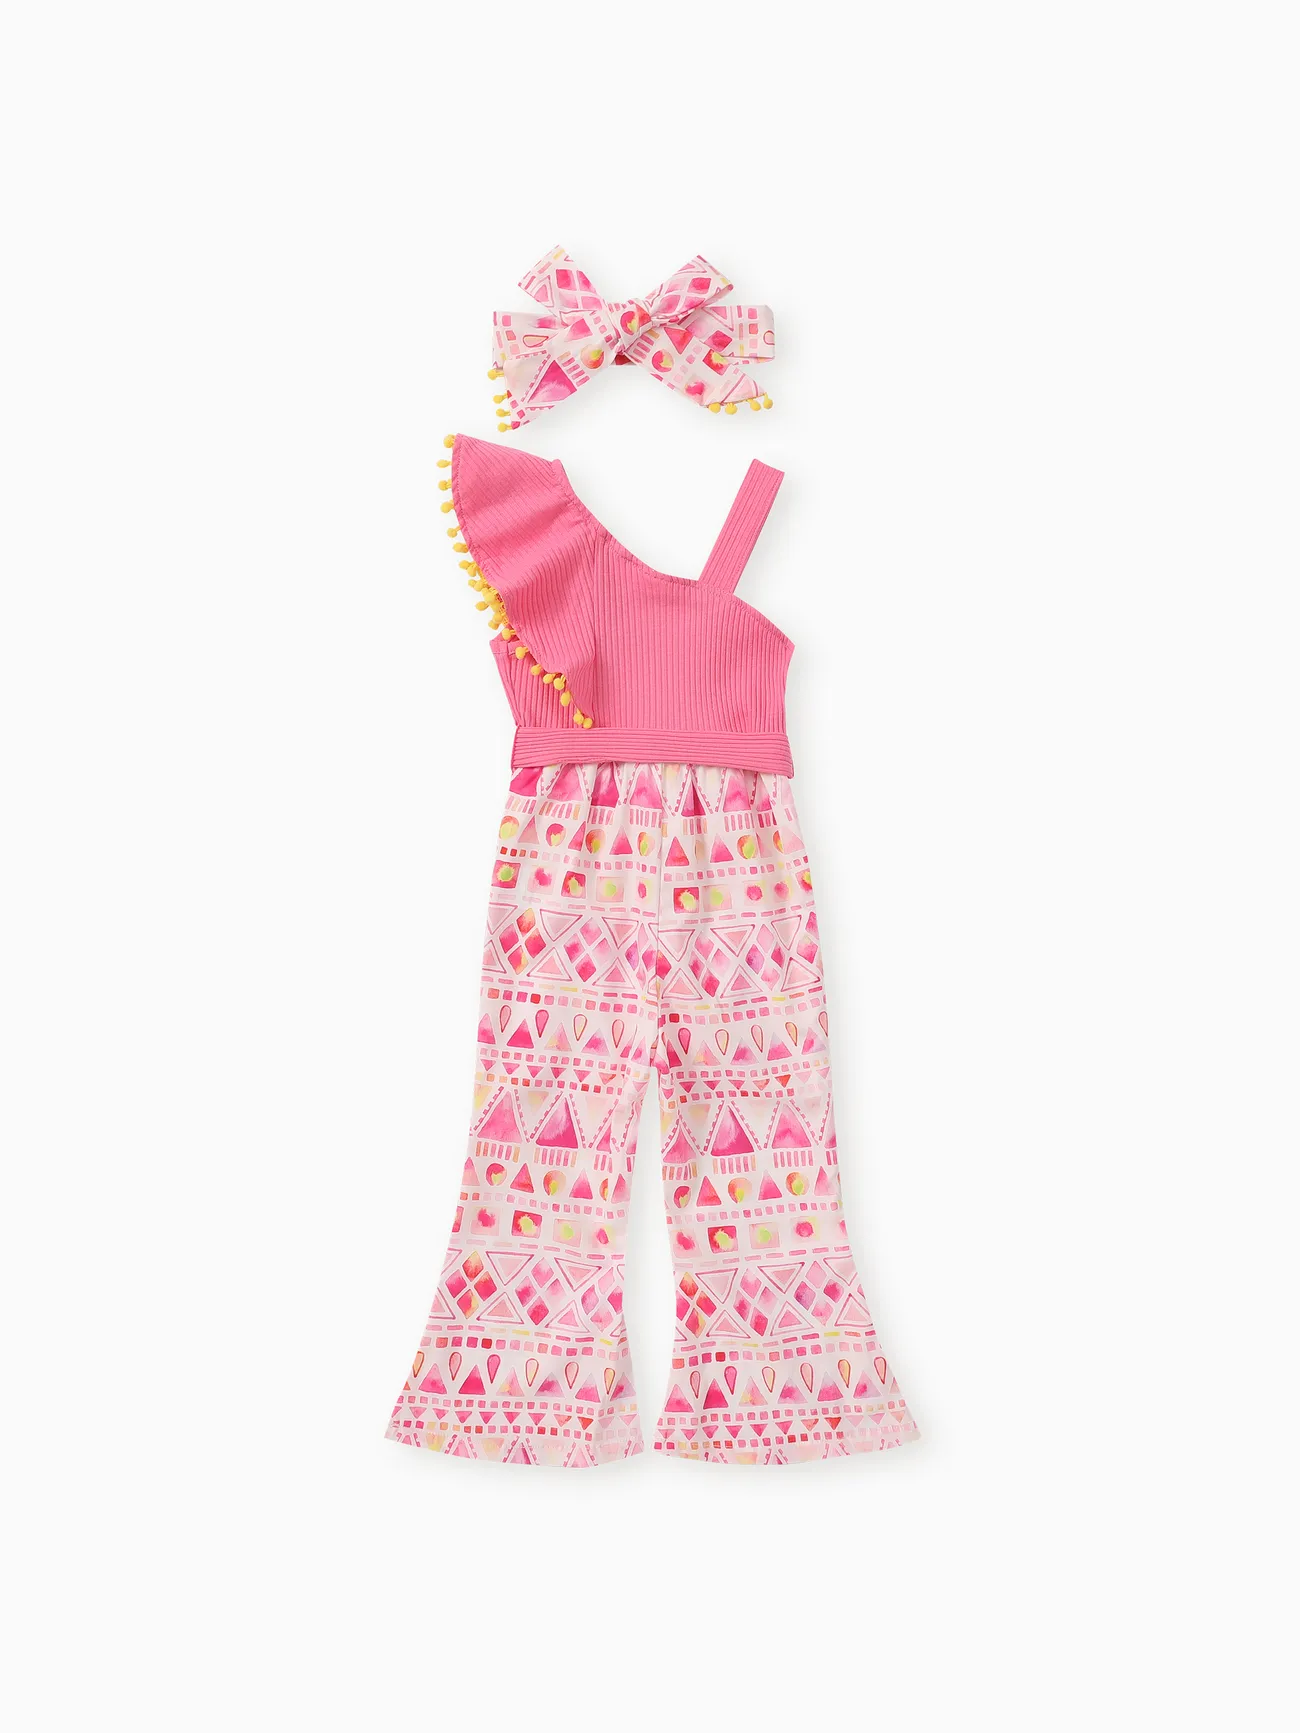 Toddler Girl 2cps Sweet Colorblock Geometric Pattern Jumpsuit and Headband Set Pink big image 1